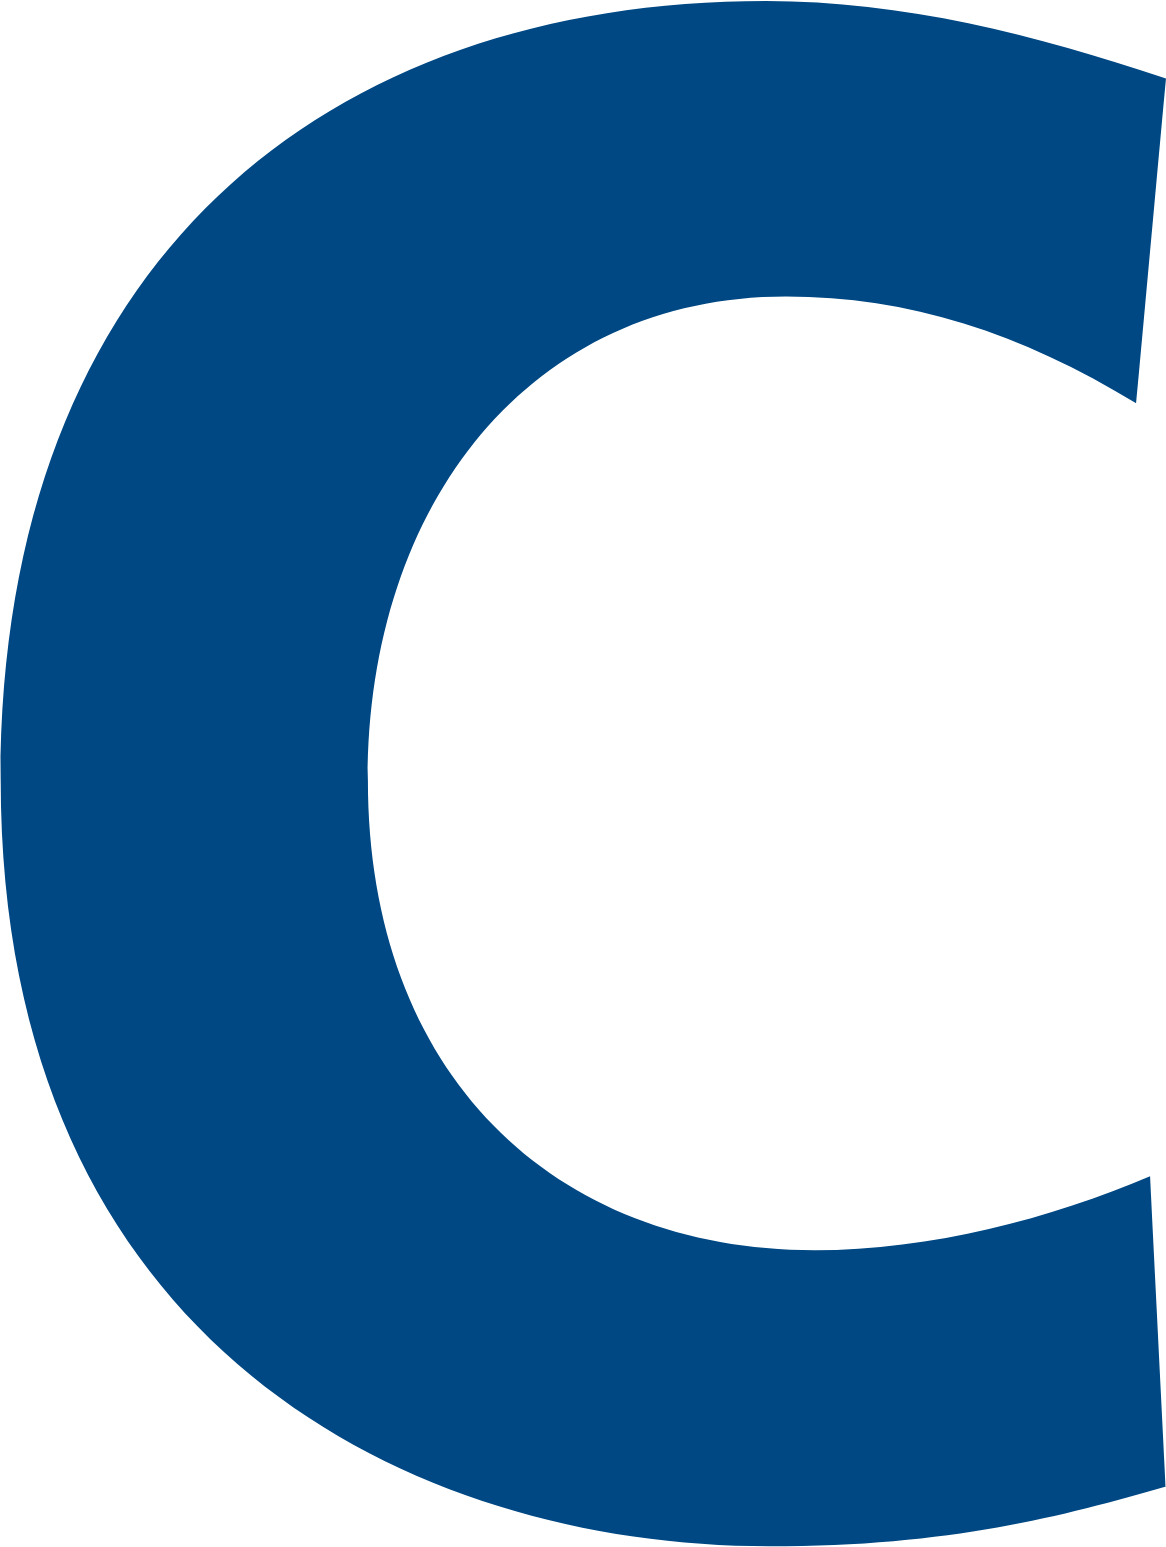 Crompton Greaves Consumer Electricals logo (PNG transparent)